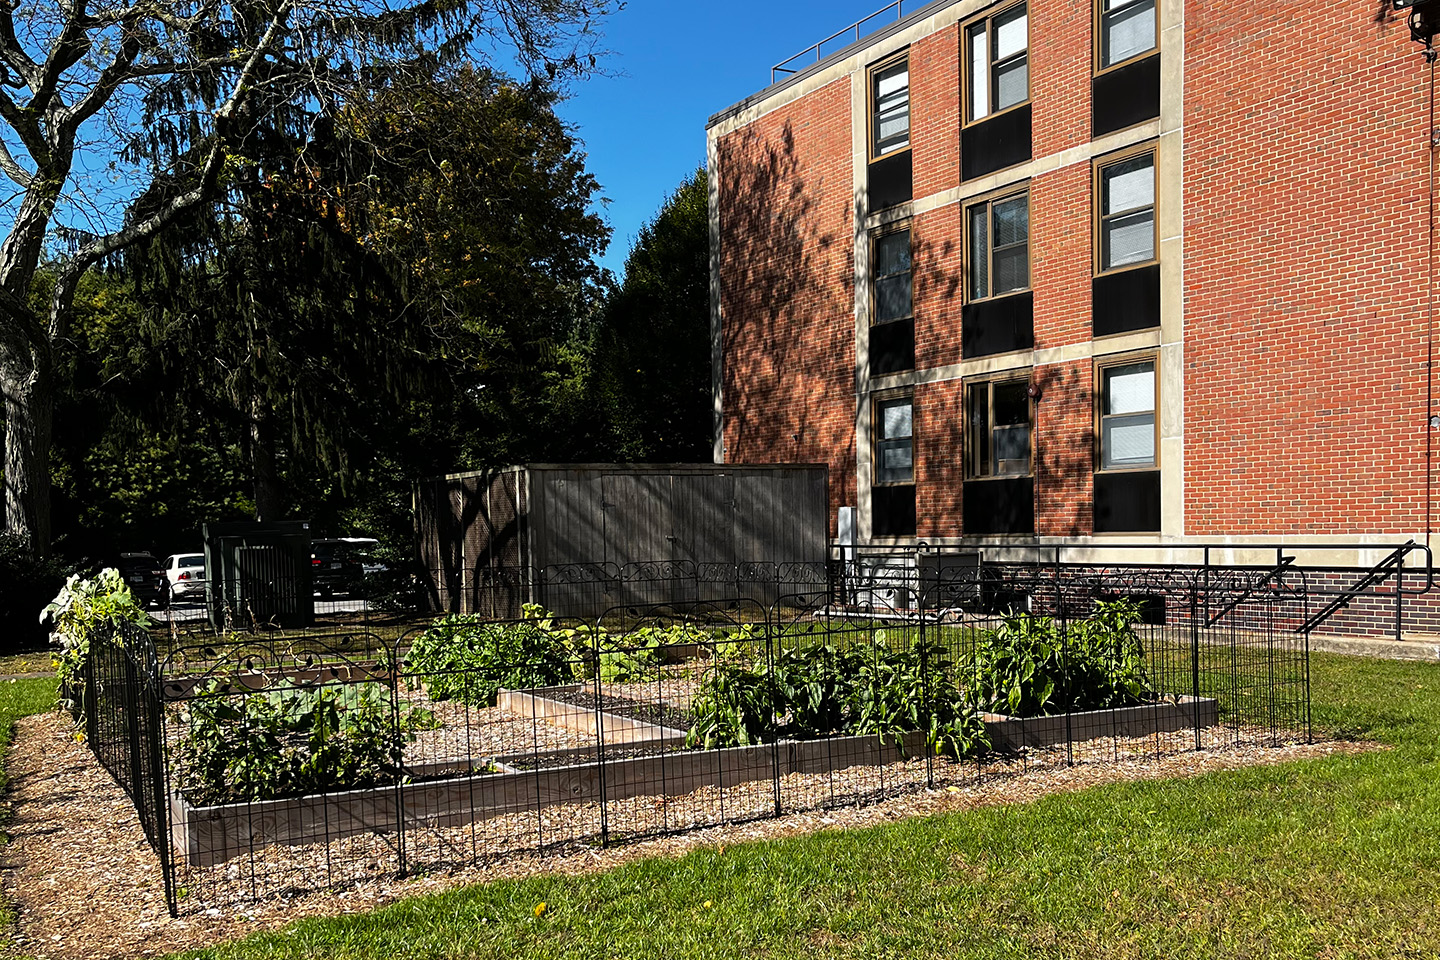 External view of the Adelphi University Community Garden behind the Linen Hall residence hall.